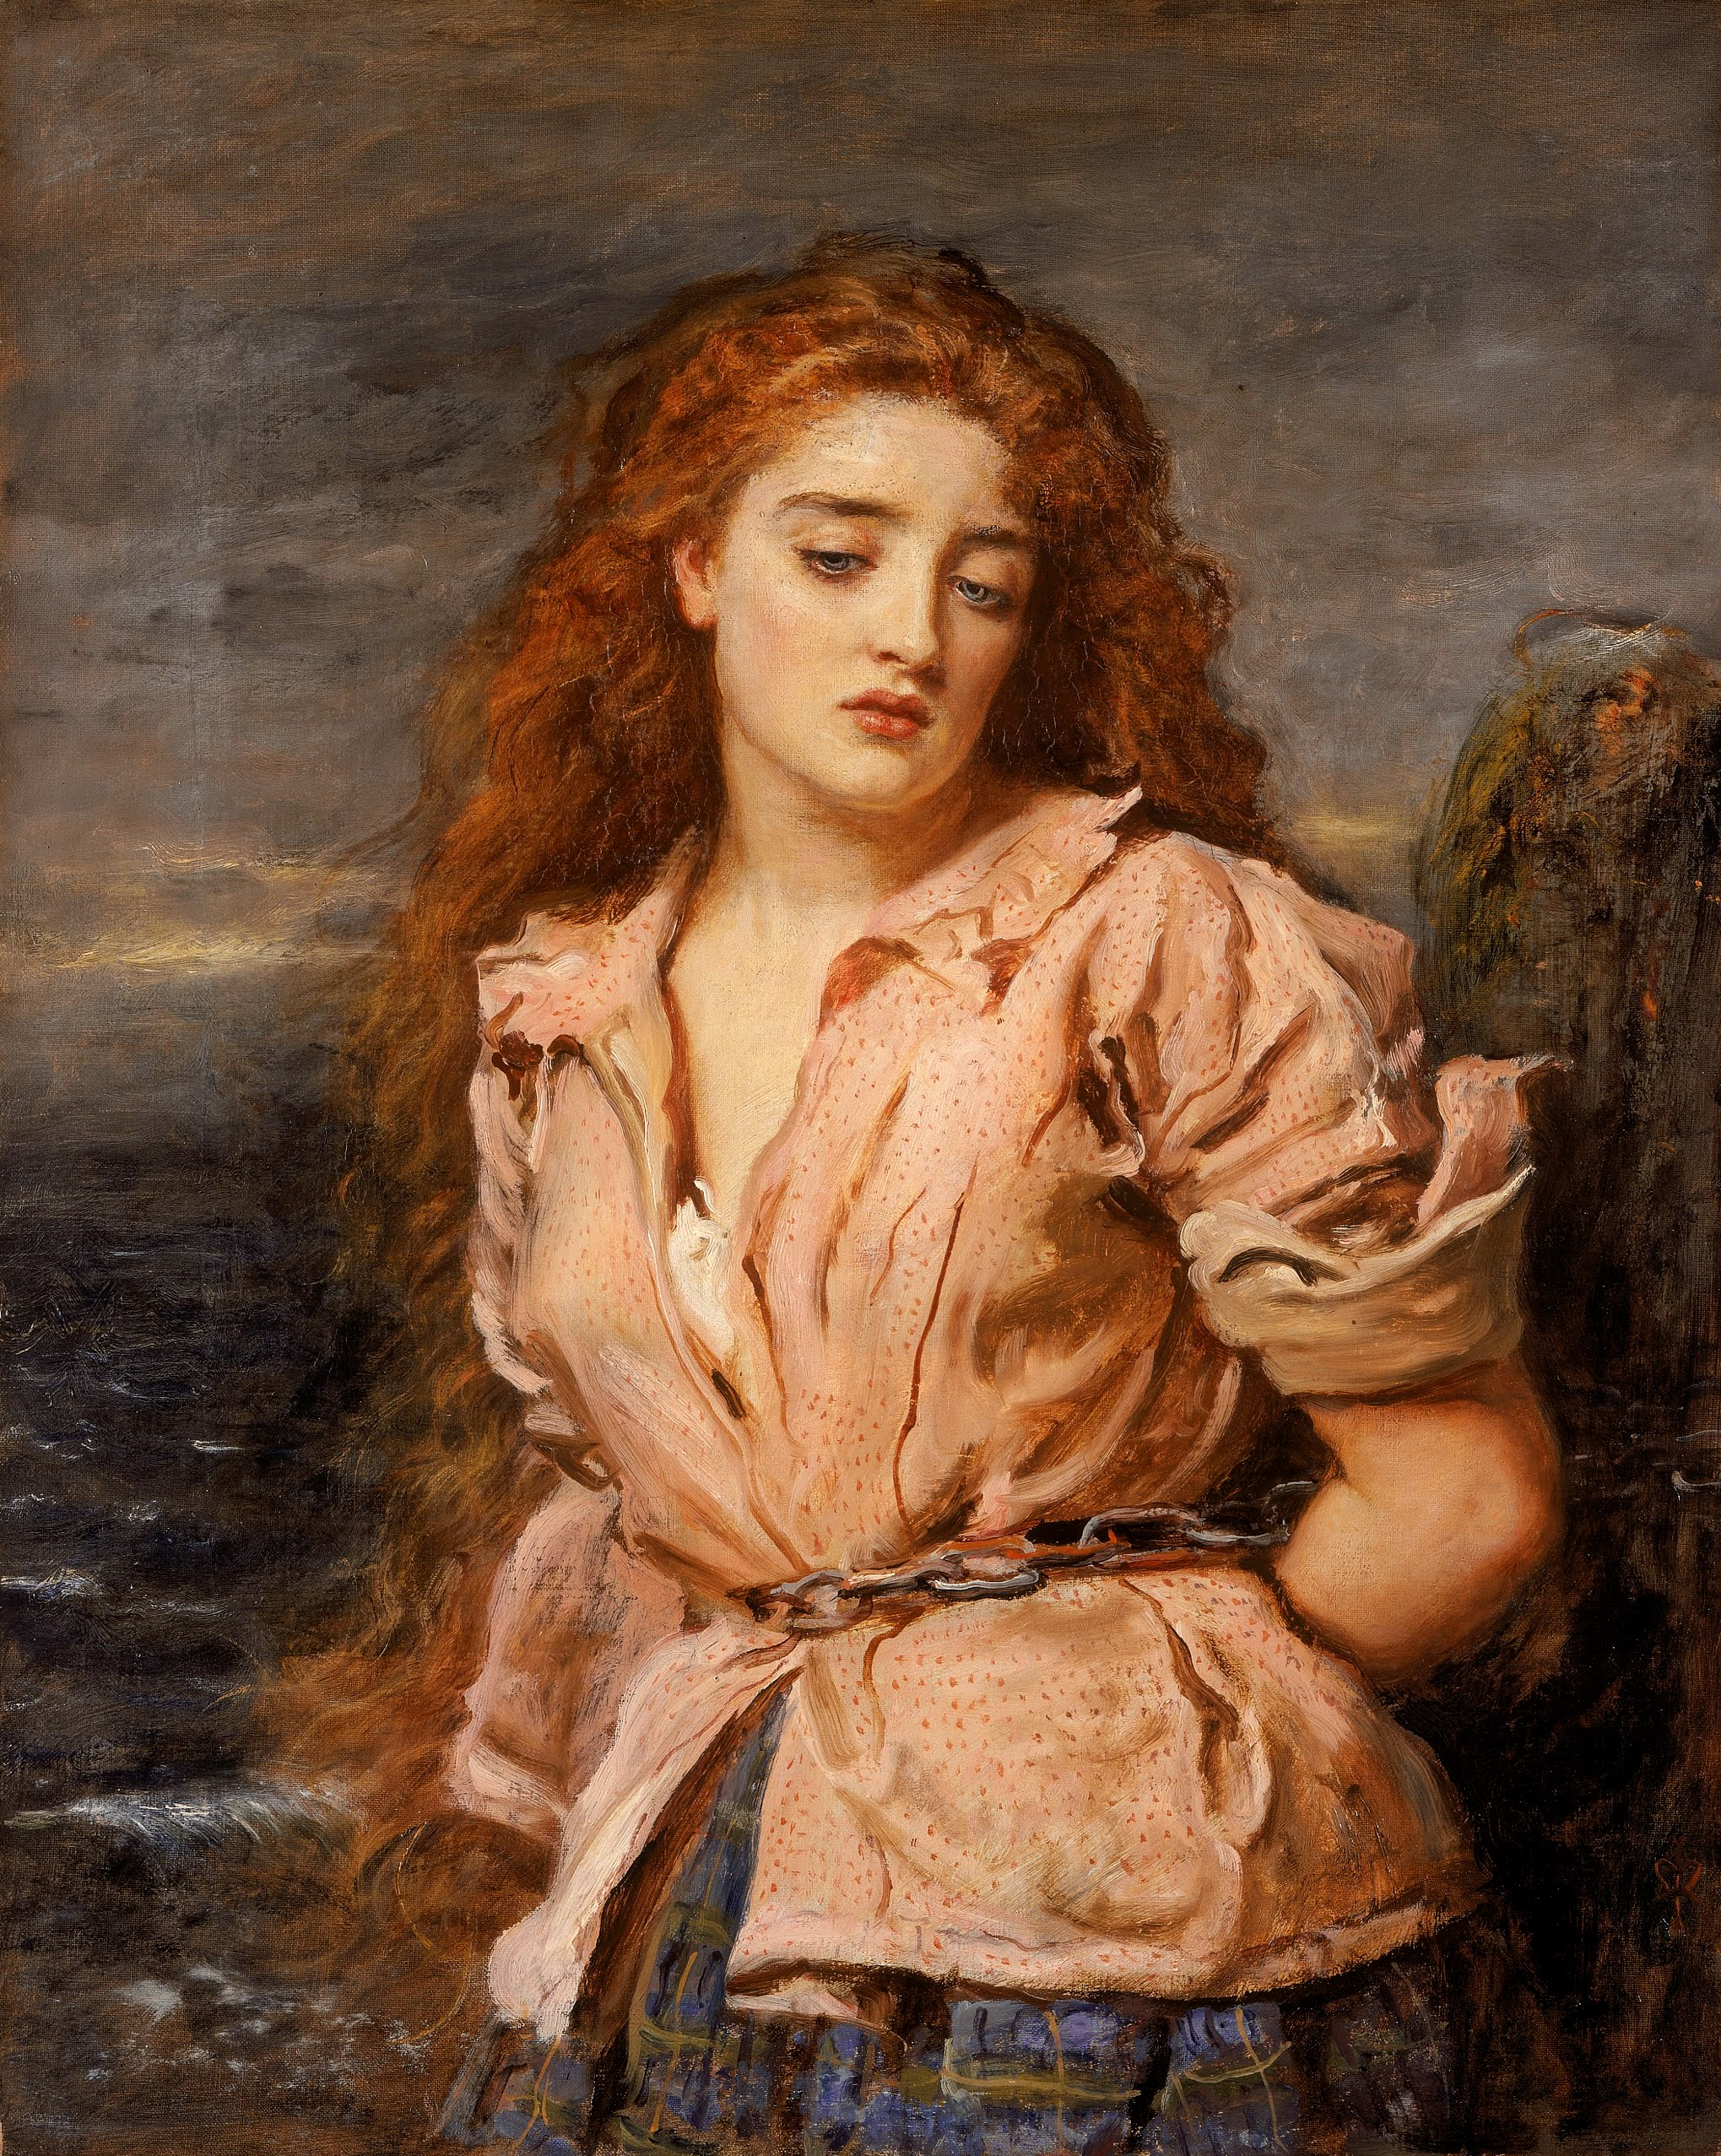 The Martyr of the Solway by John Everett Millais - 1871 - 70.5 × 56.5 cm Walker Art Gallery